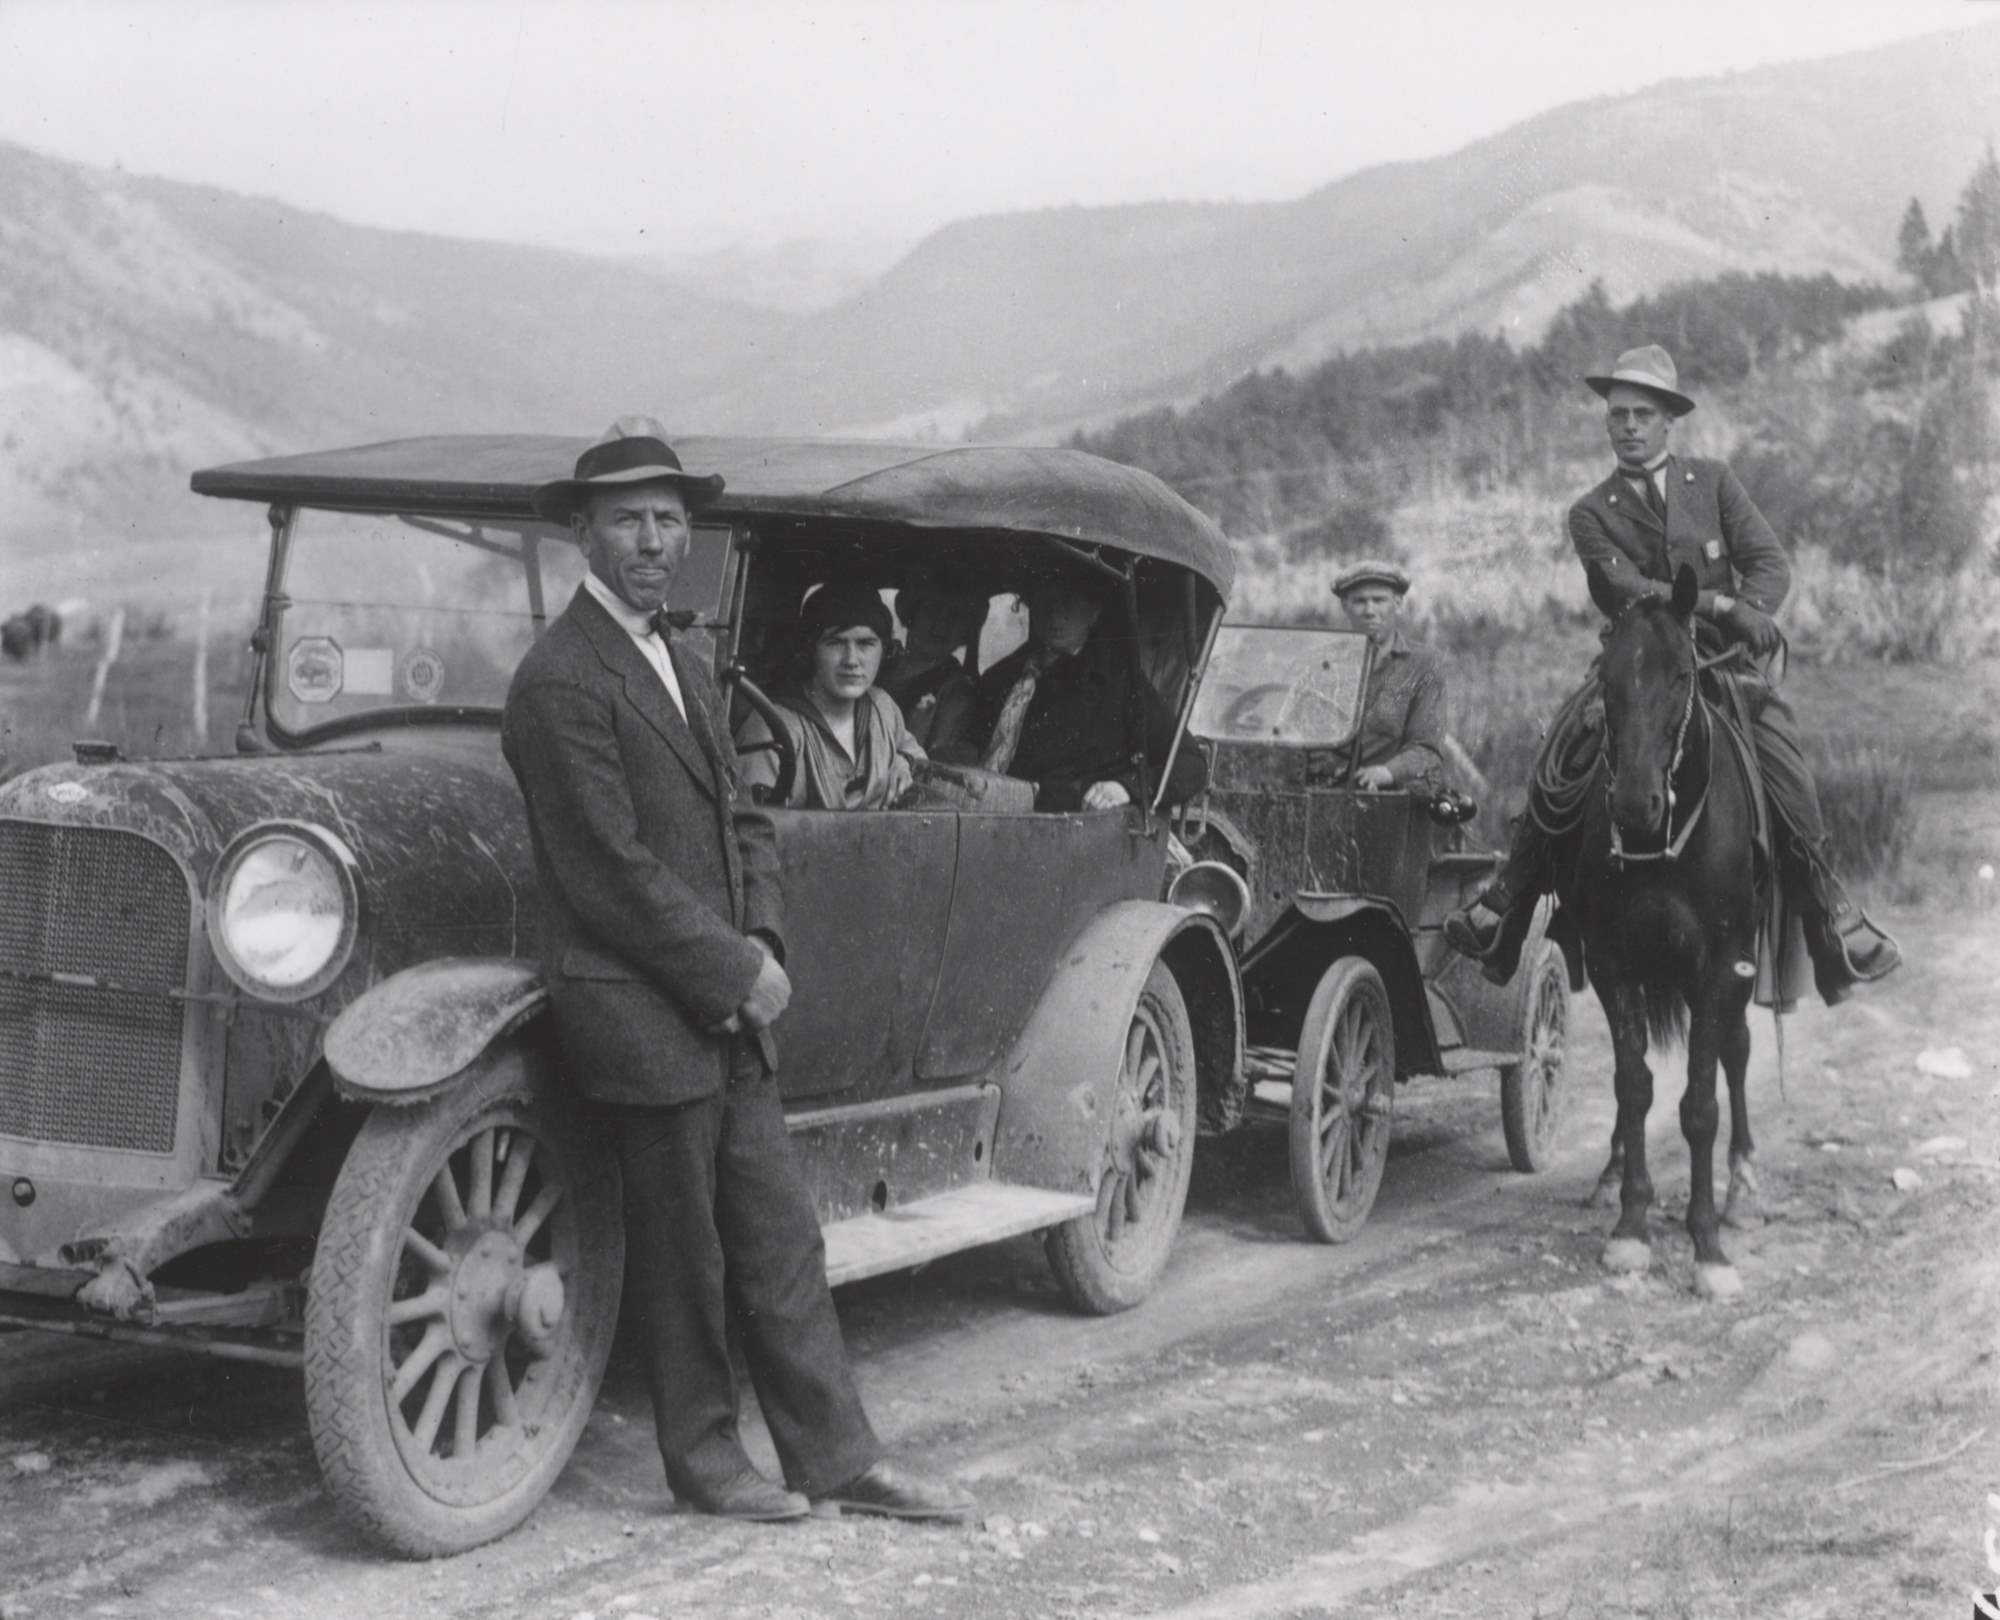 Man in NPS uniform, broad brim hat and a shield shaped badge rides a horse along side visitors in old cars stopped on the side of the road.